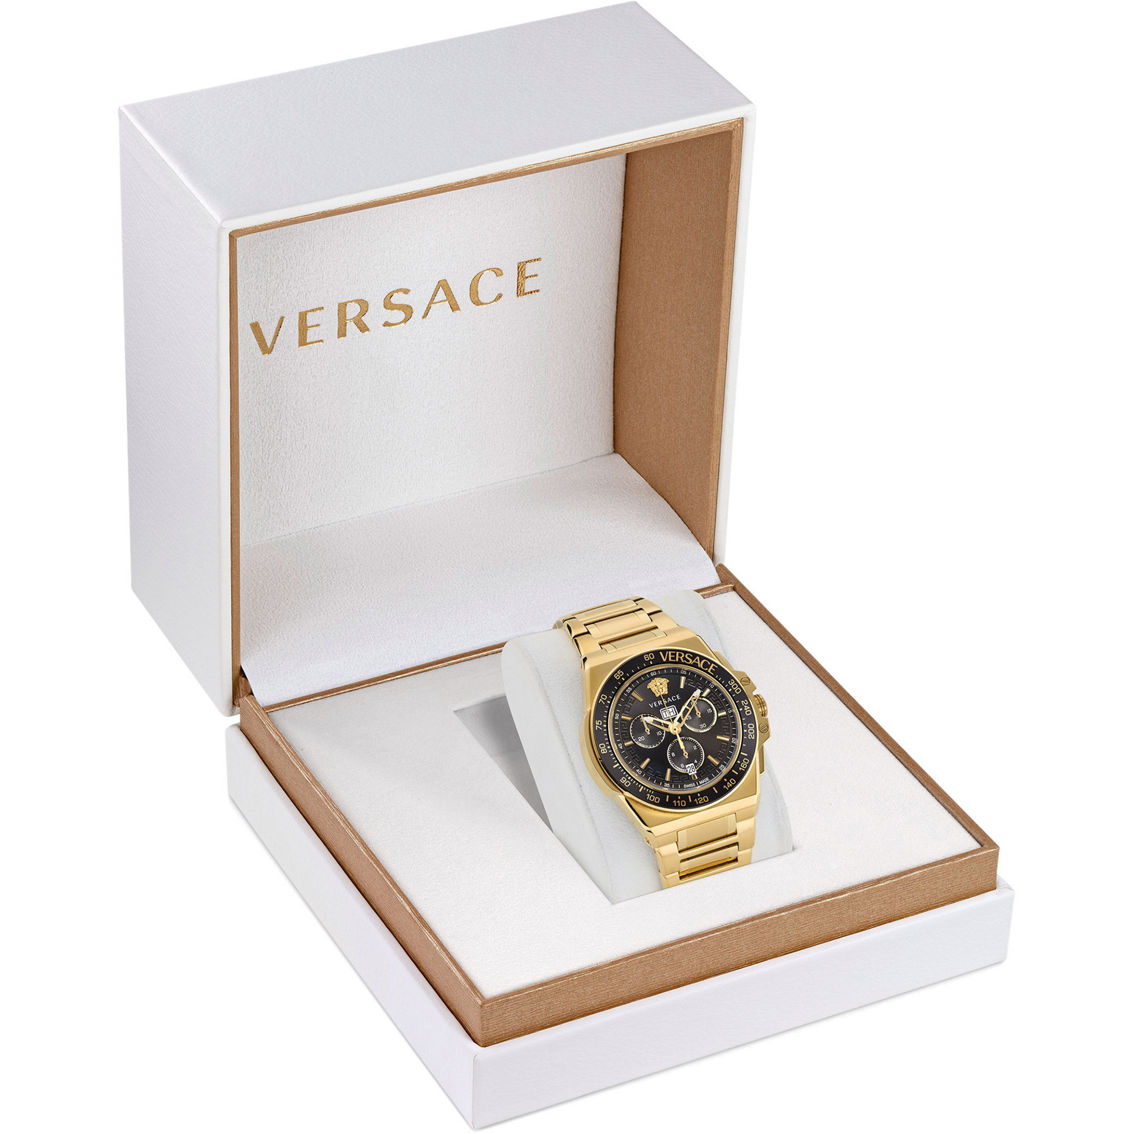 Versace Greca Extreme Jewelry Gold Stainless Exchange Ve7h00623 Shop Band Watches Dial Black | Watch Yellow | The | Chrono Ip & Goldtone